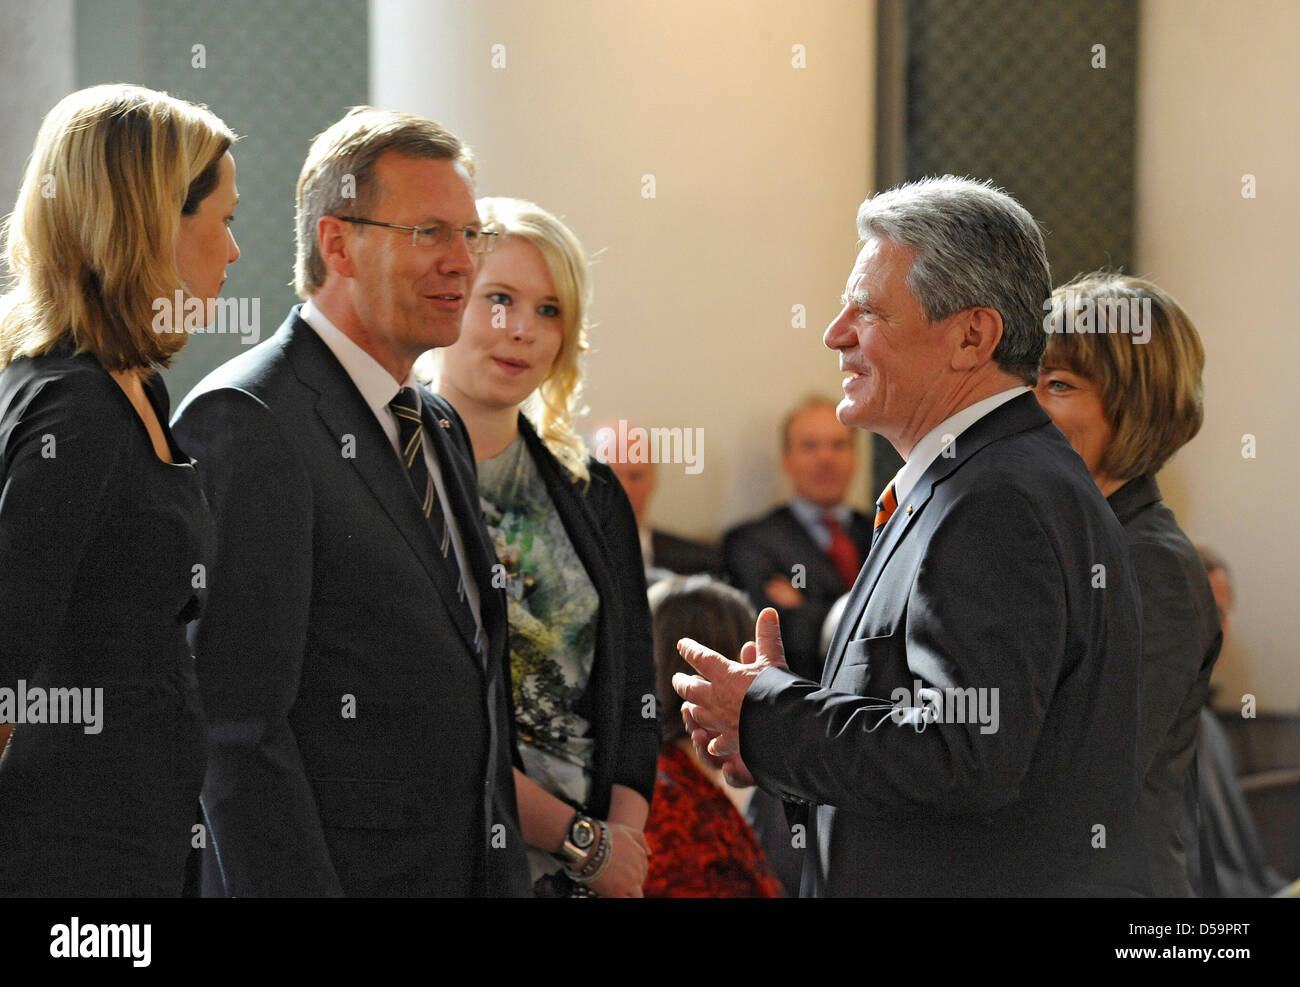 Presidential candidates Christian Wulff (2-L), his wife Bettina Wulff(L), his daughter from first marriage Annalena (C), presidential candidate Joachim Gauck (2-R) and his partner Daniela Schadt (R) arrive for an ecumenical church service ahead of the election of the German President in Berlin, Germany, 30 June 2010. The German President is elected by the Federal Convention. Photo: Stock Photo